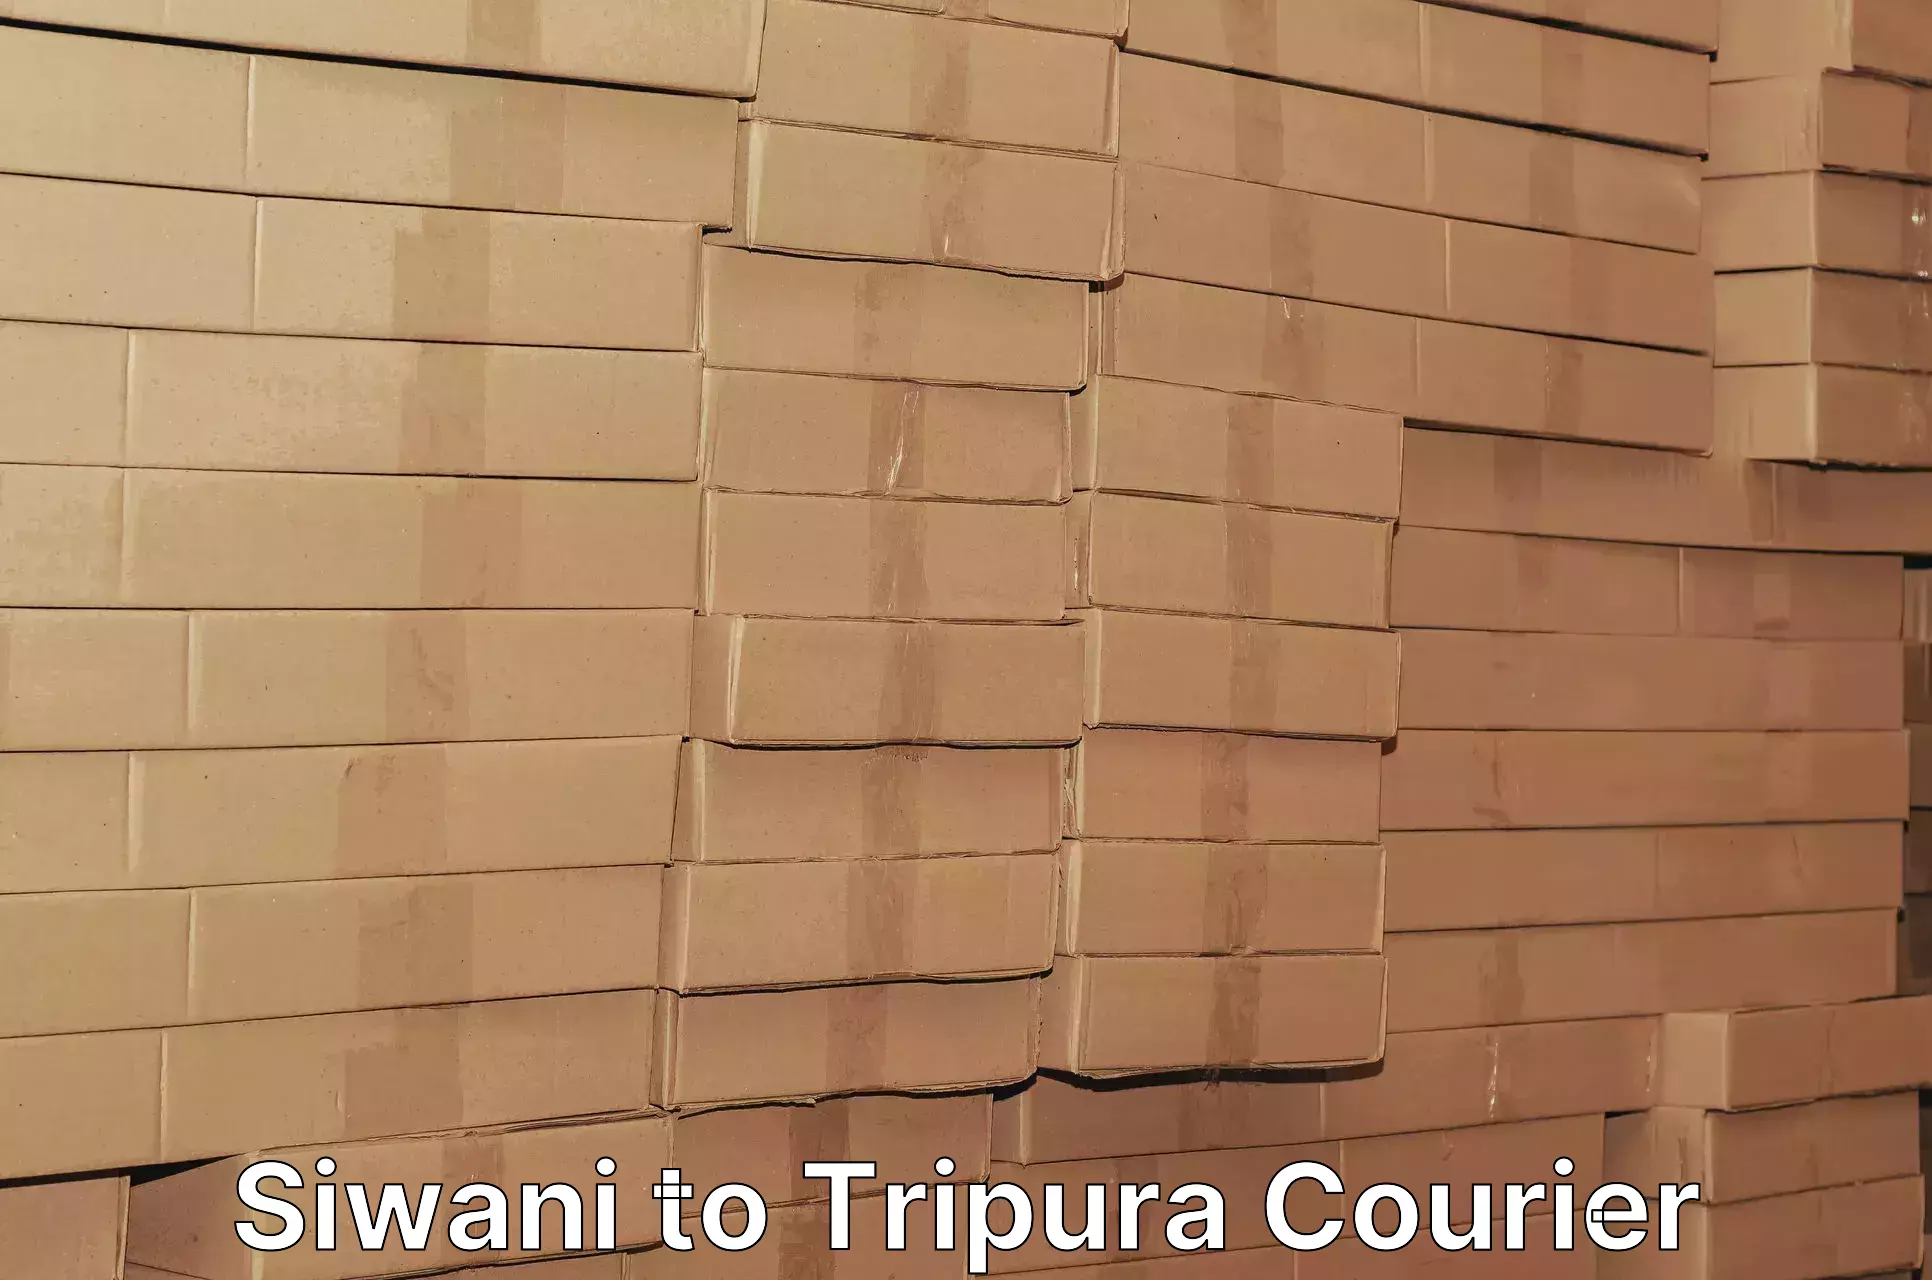 Efficient shipping operations Siwani to Udaipur Tripura